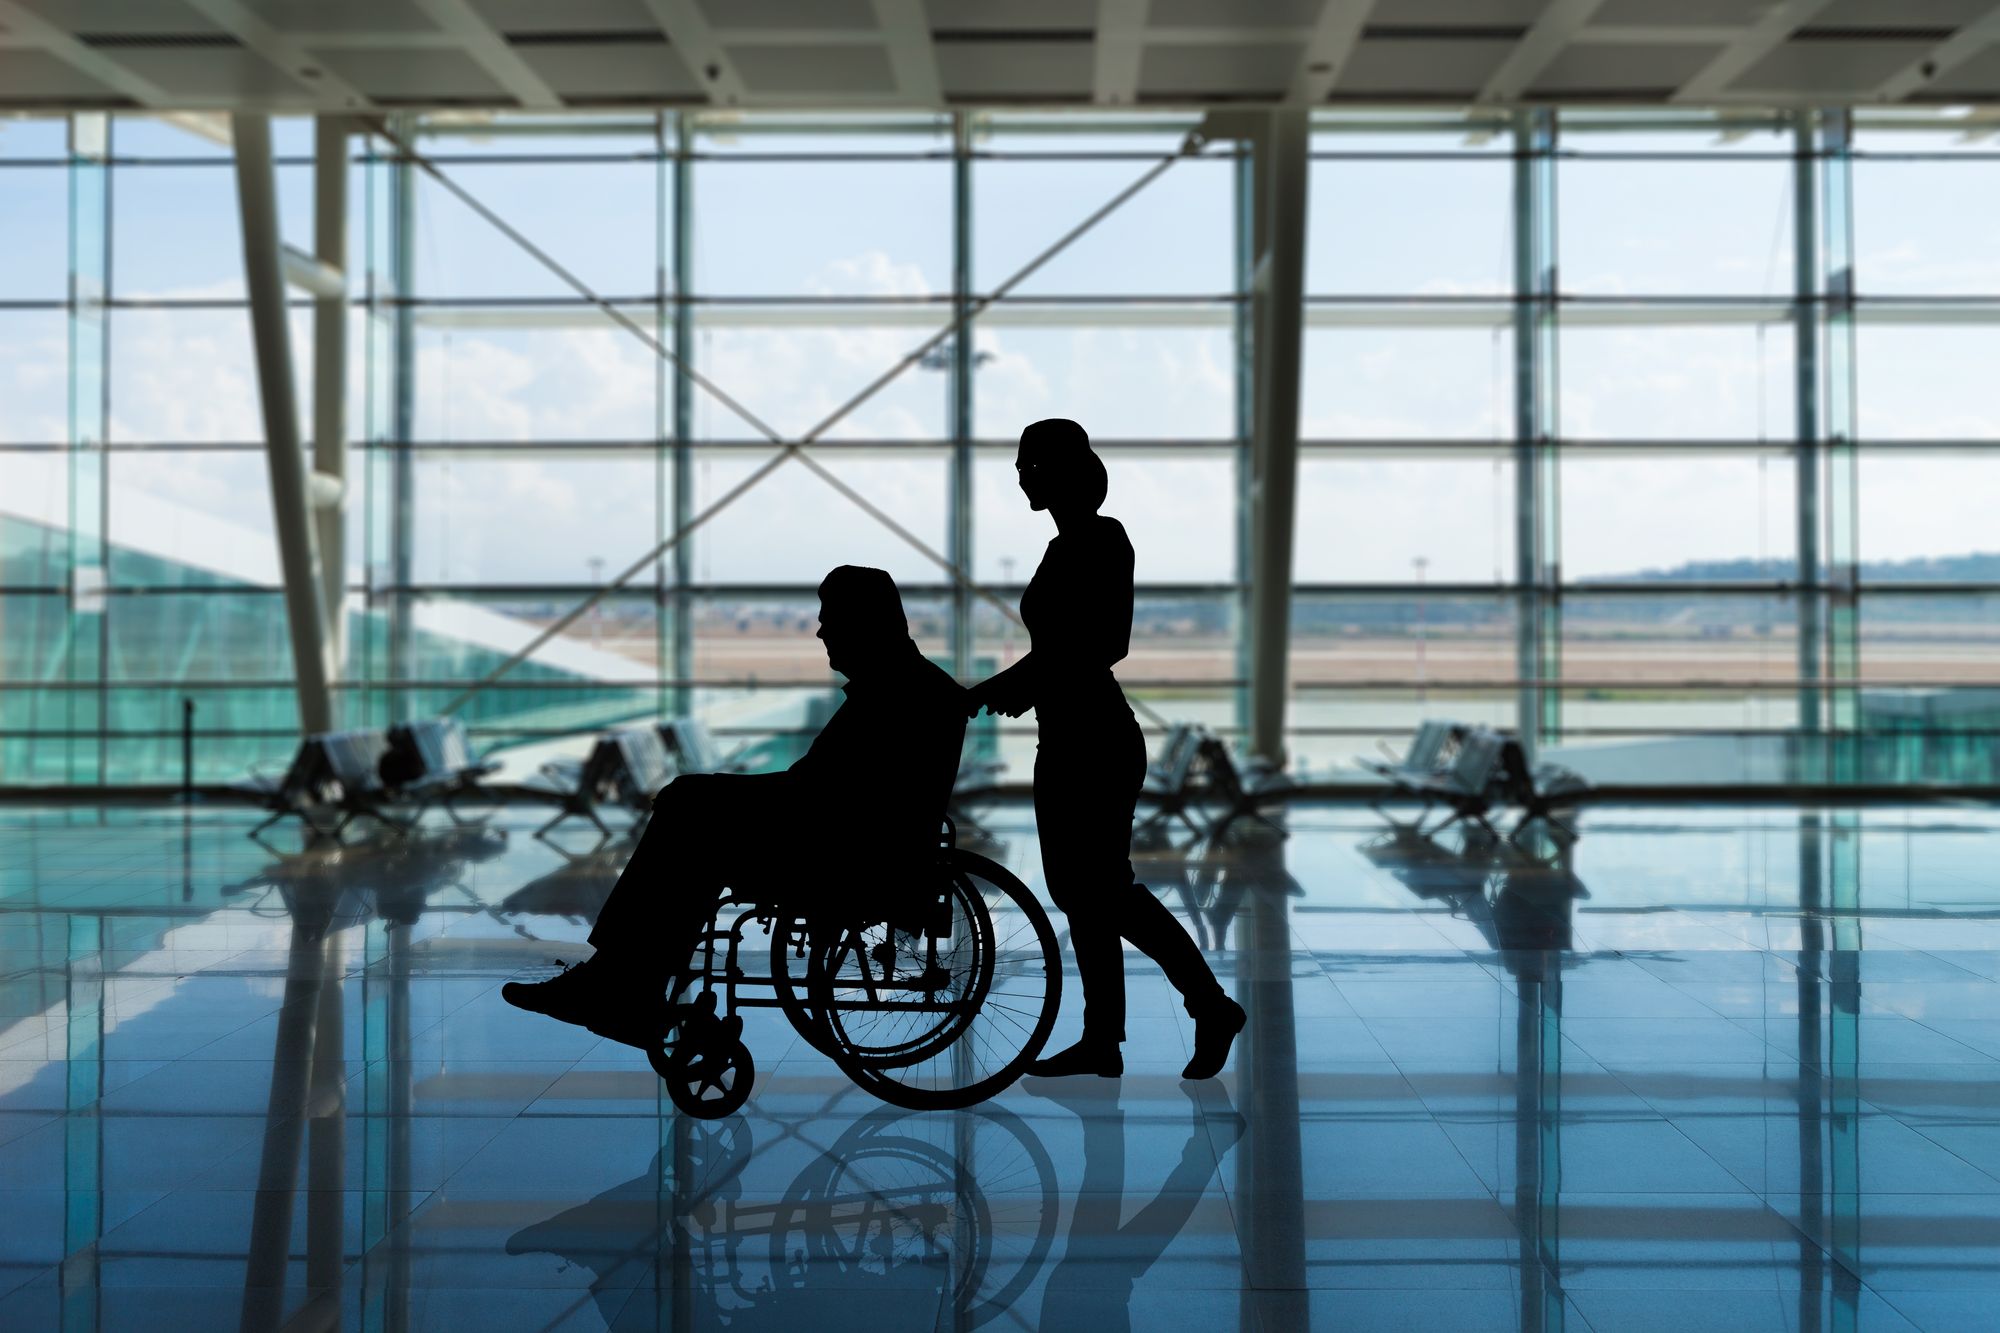 Request wheelchair assistance at the airport. They should help you navigate the airport and carry luggage.